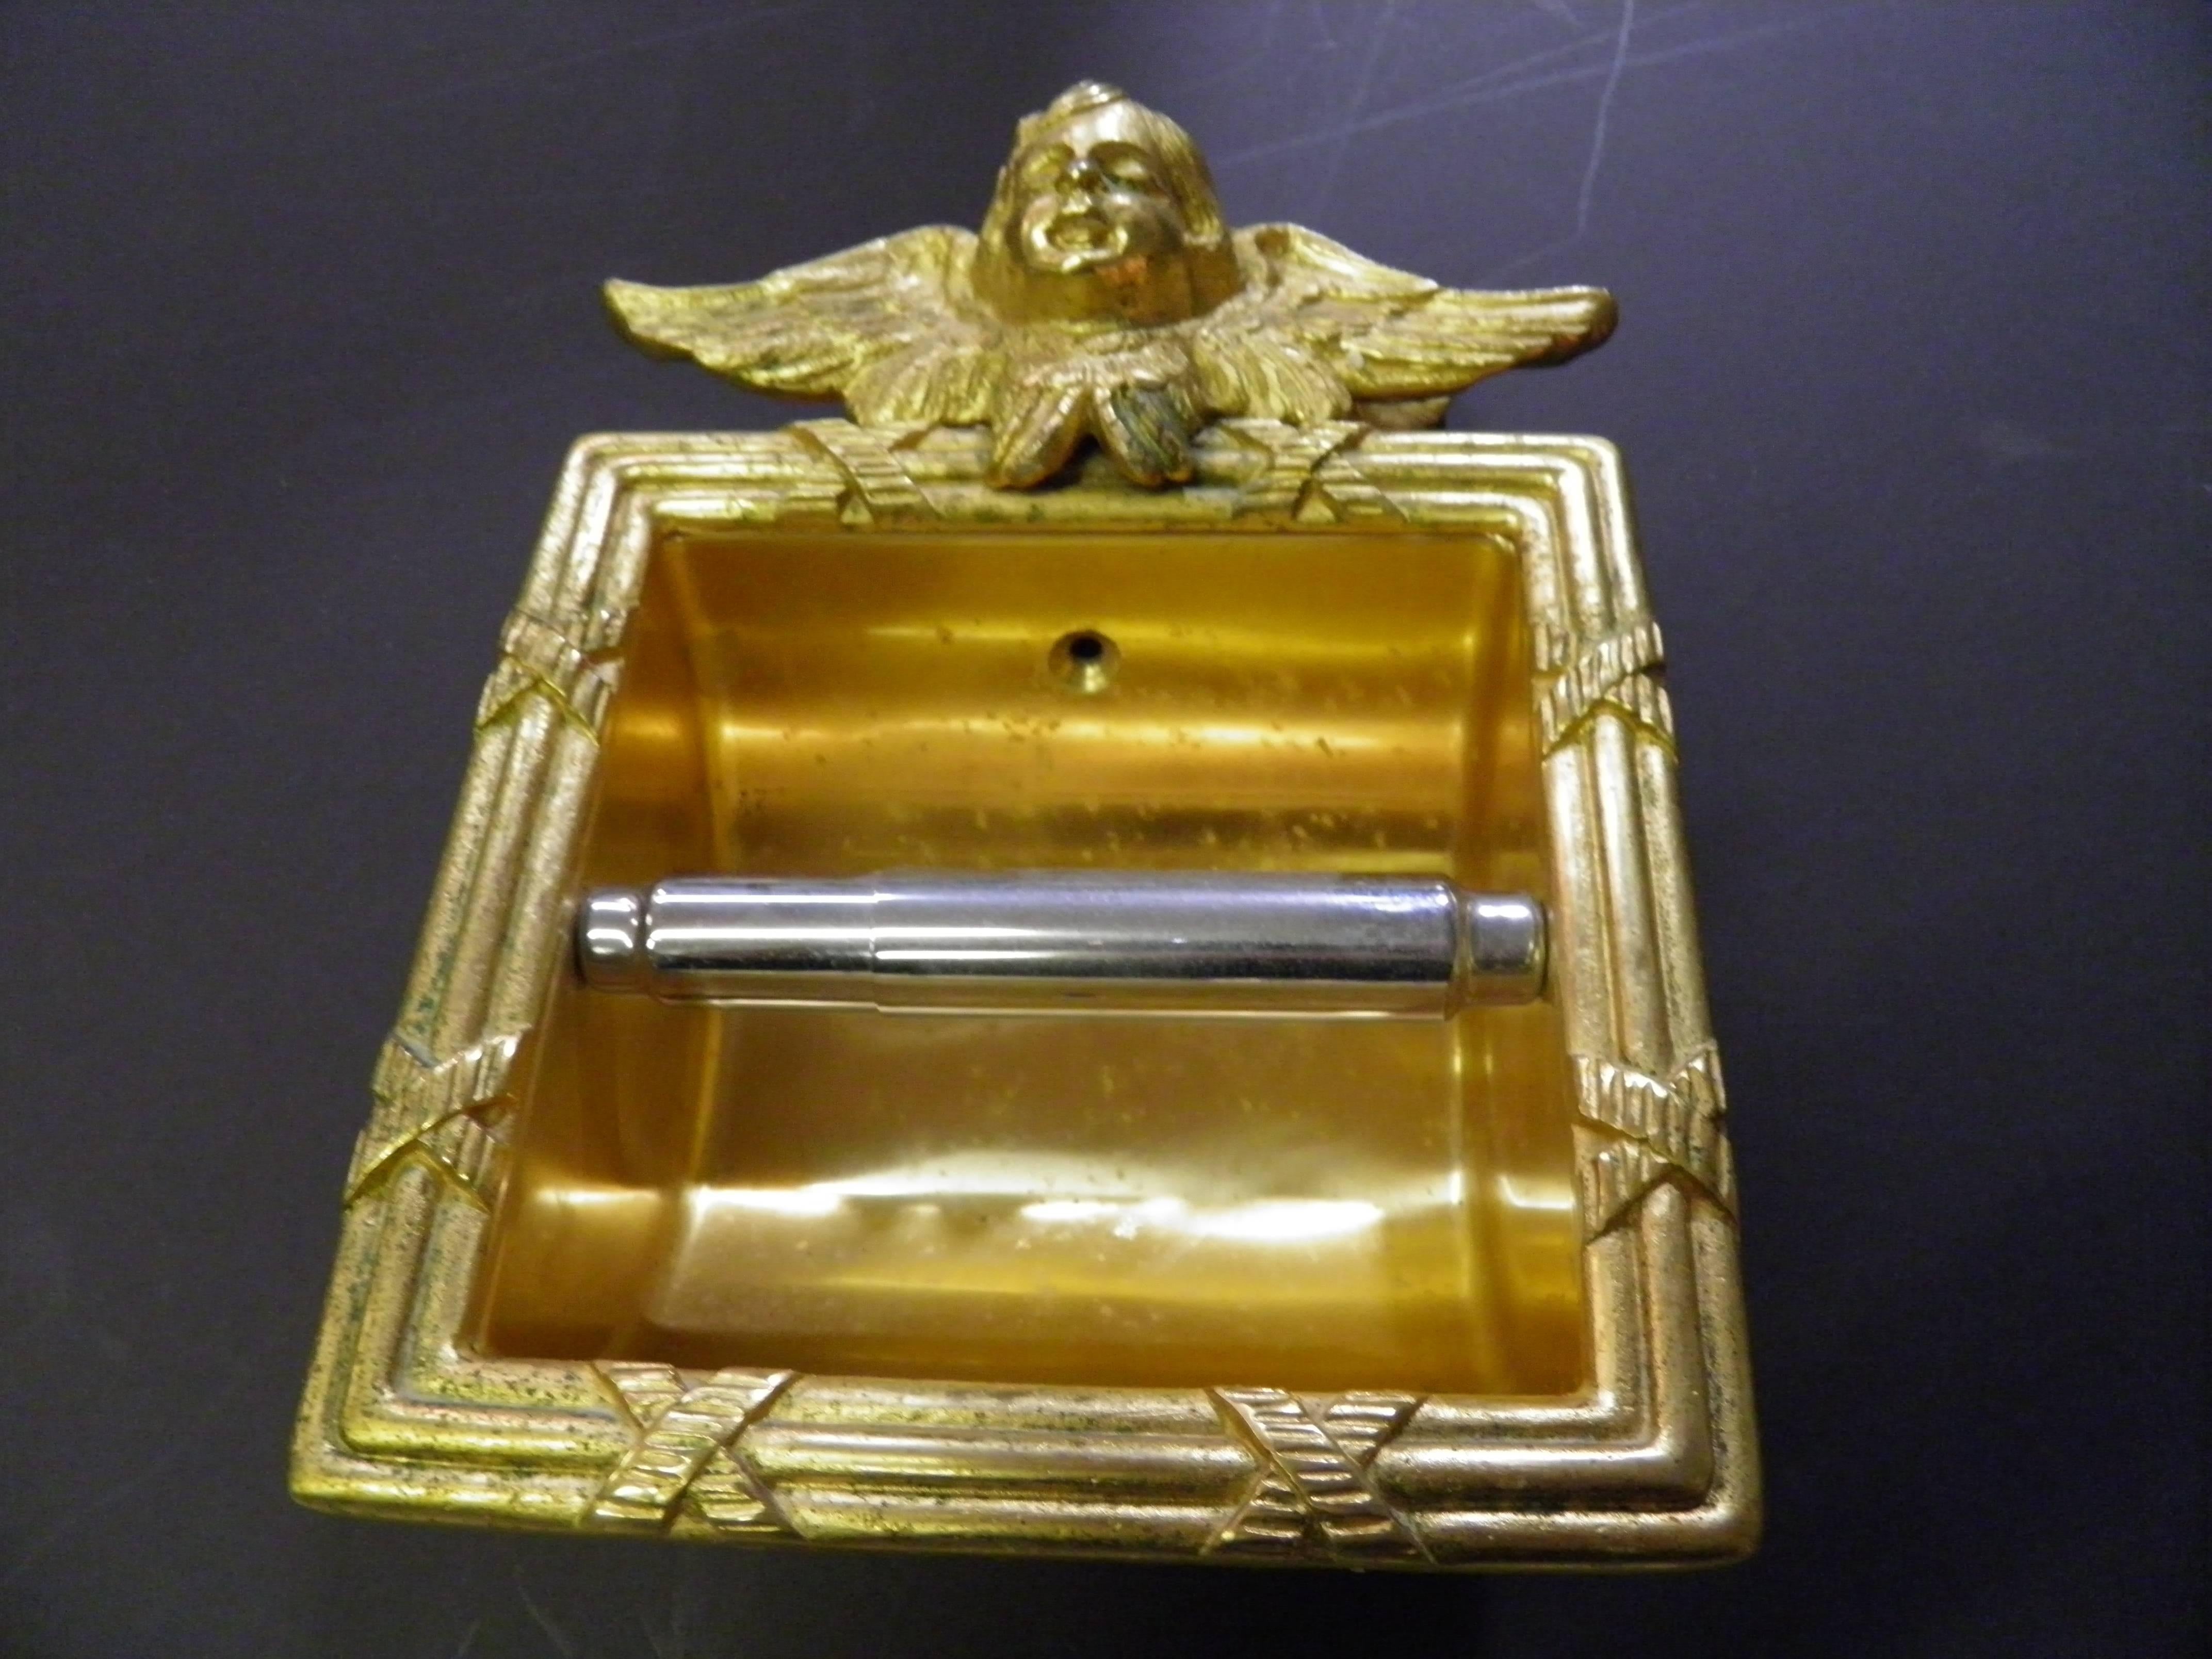 Luxurious rare made in a very small quantity in the 1970s Sherle Wagner bathroom angel top toilet tissue holder 22-carat gold finish-ribbon and reed Angel design recessed in the wall toilet tissue holder made to be recessed in the wall .No longer